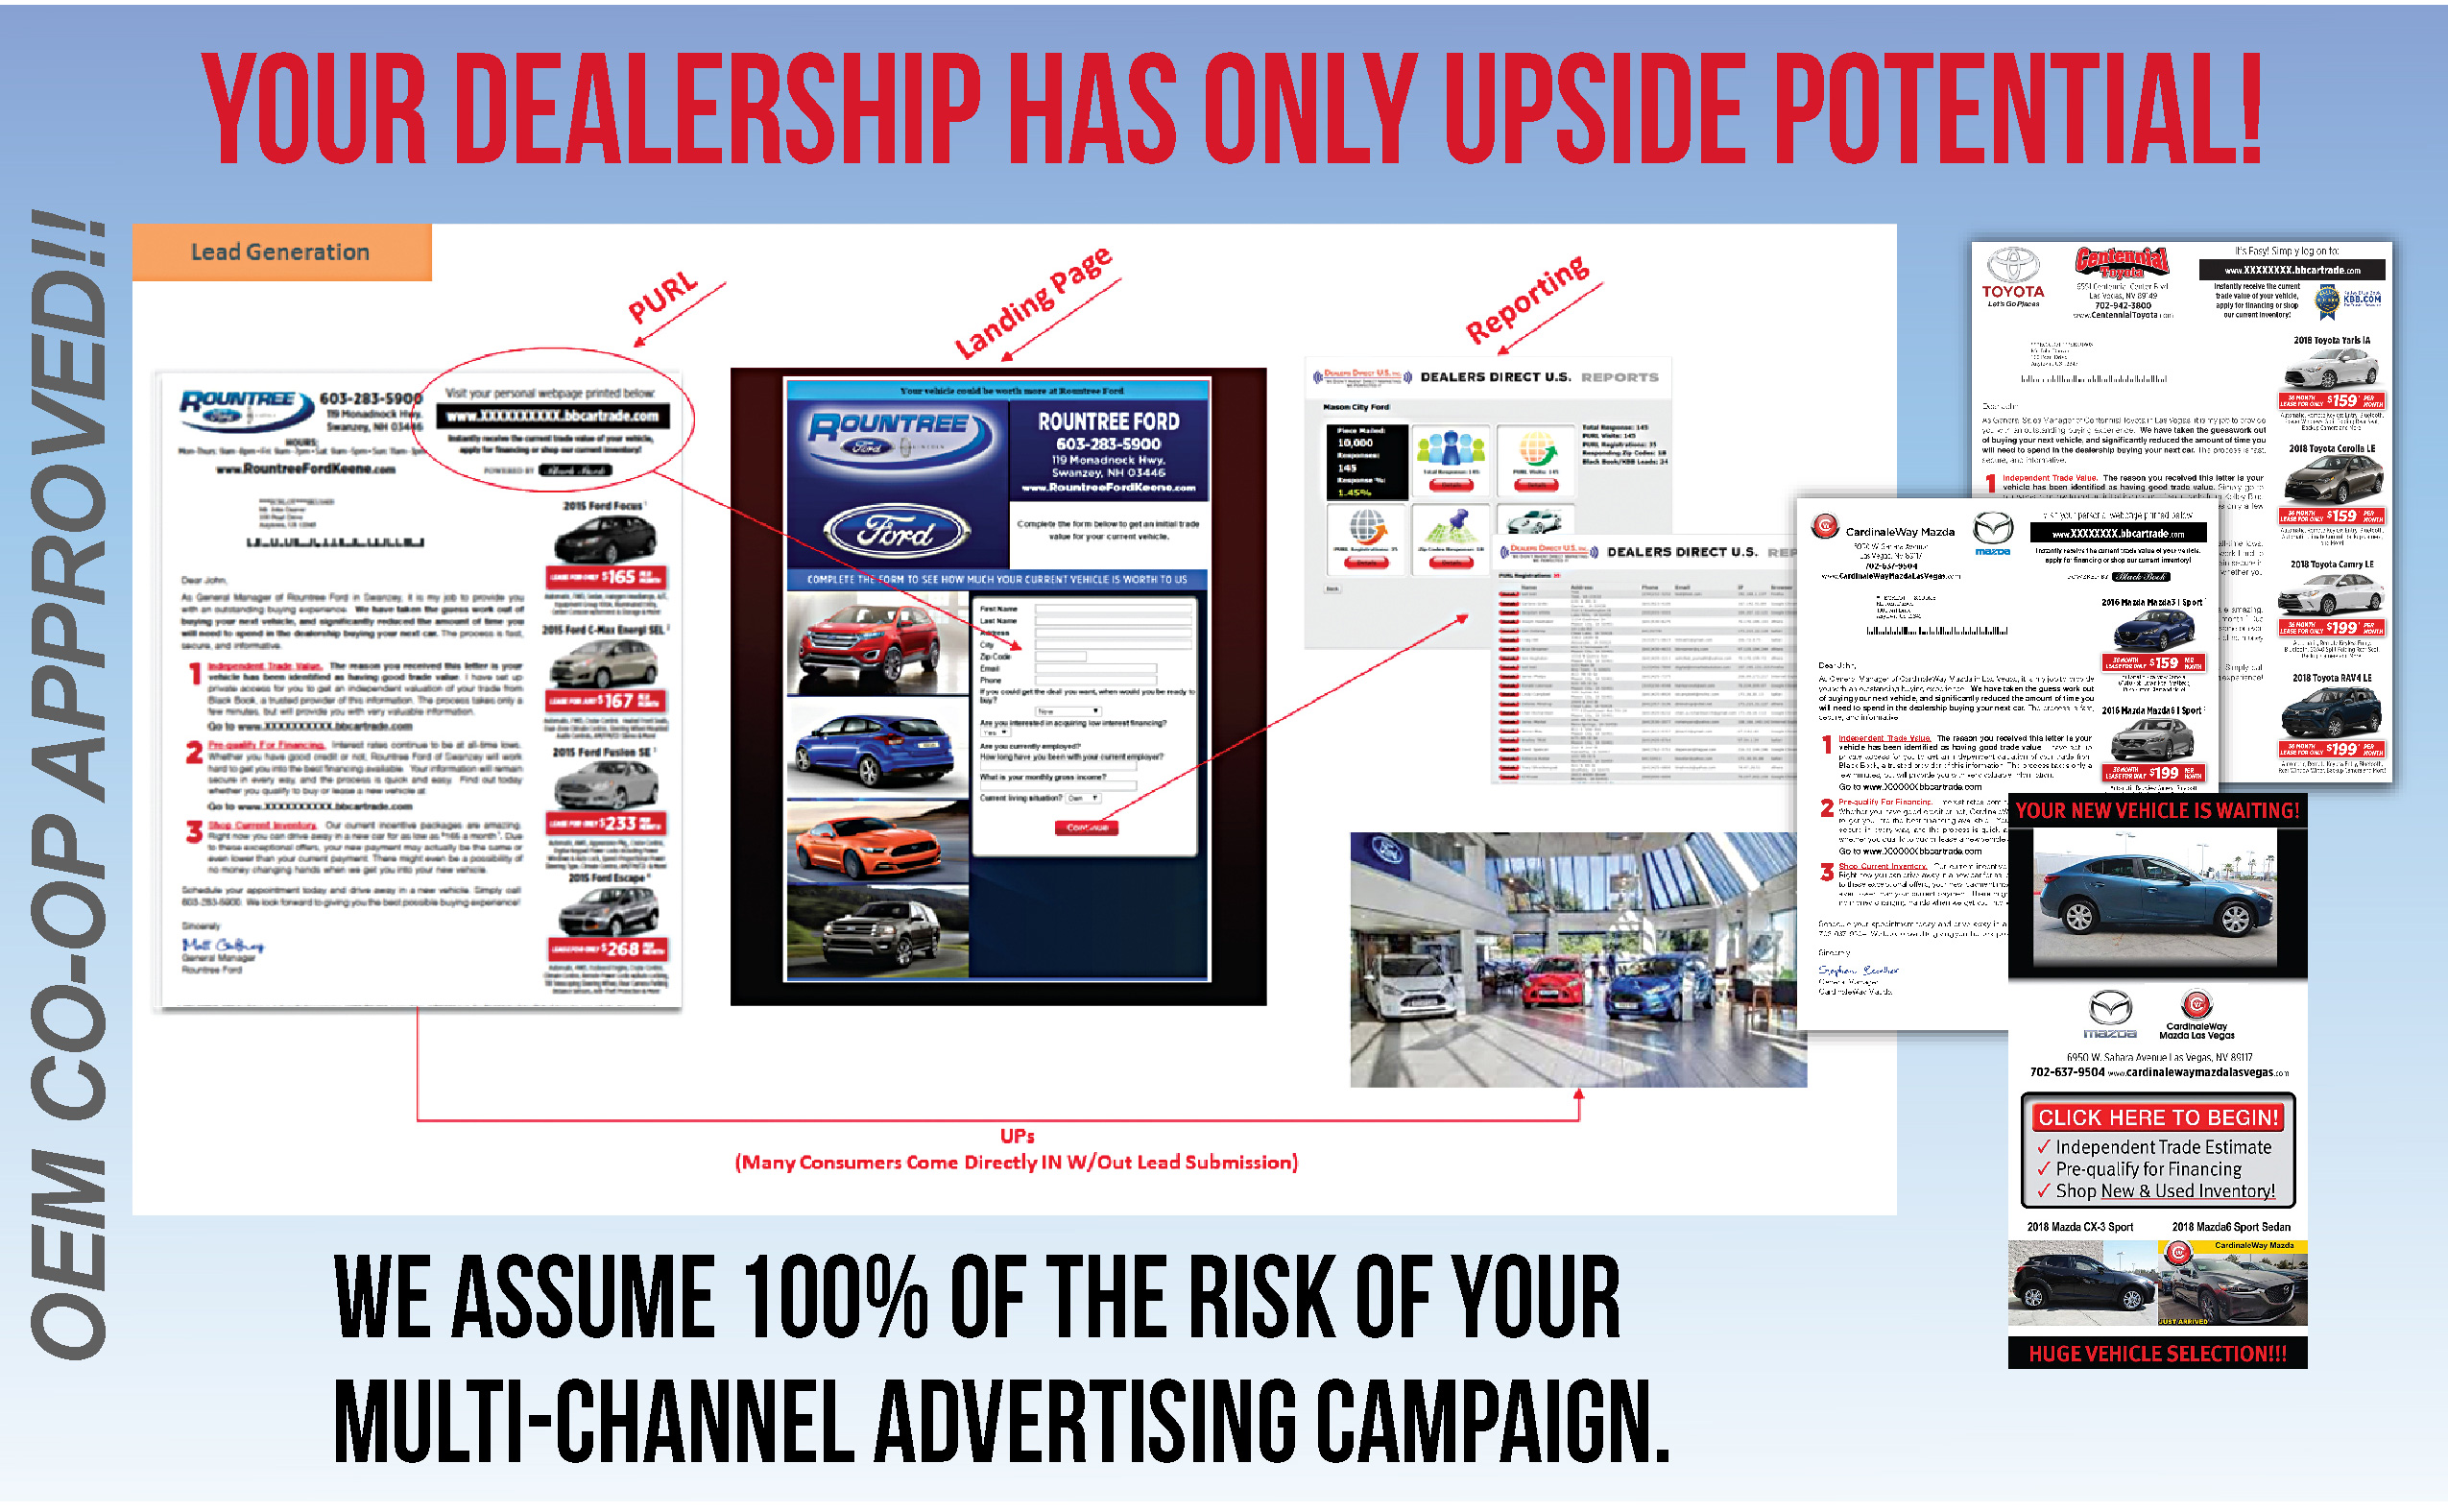 Your dealership has only upside potential. OEM co-op approved. We assume 100 percent of the risk of your Multi-Channel Advertising Campaign.